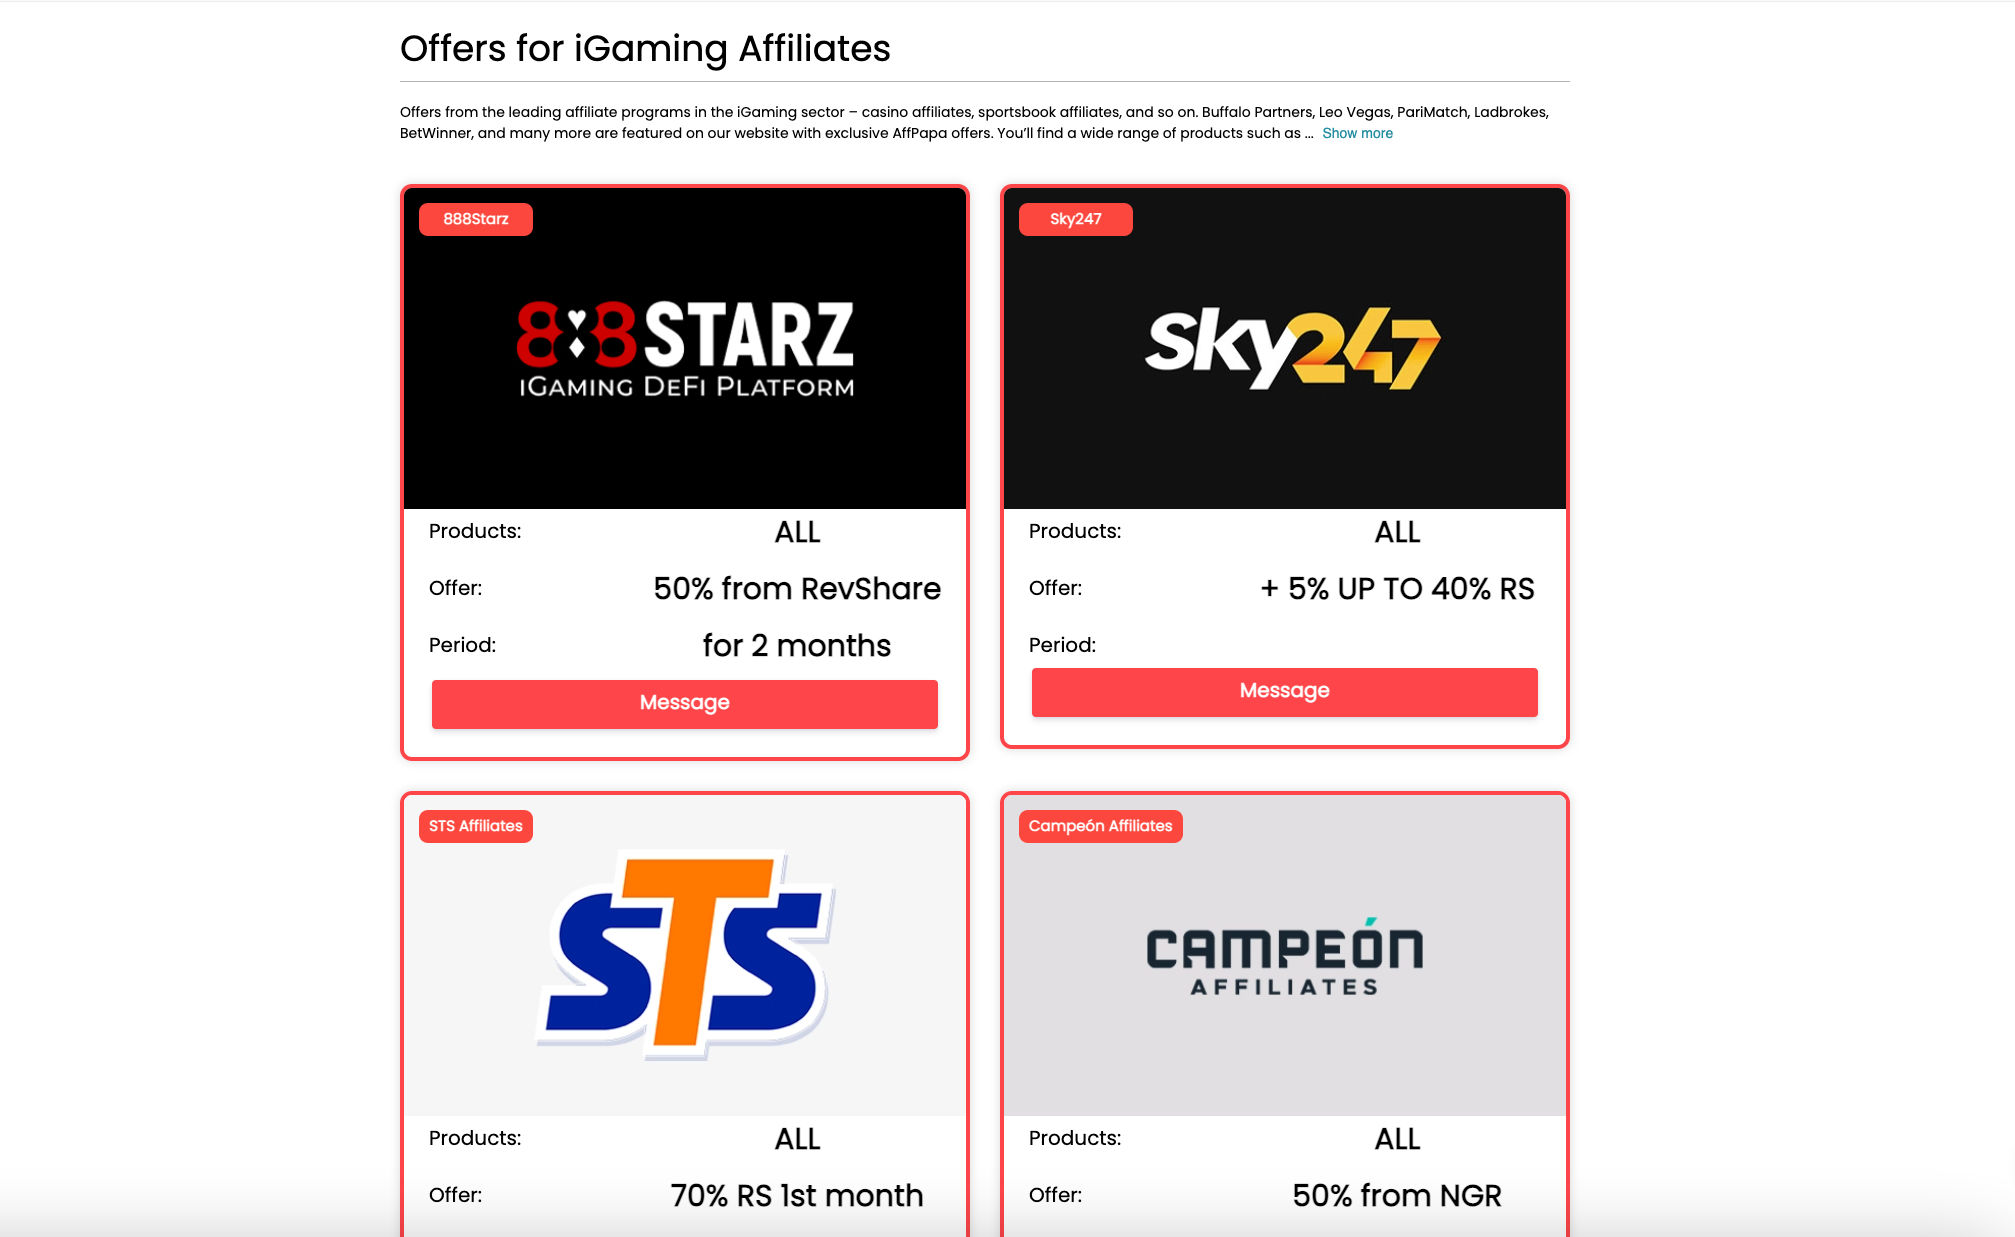 AffPapa_Offers for iGaming Affiliates page